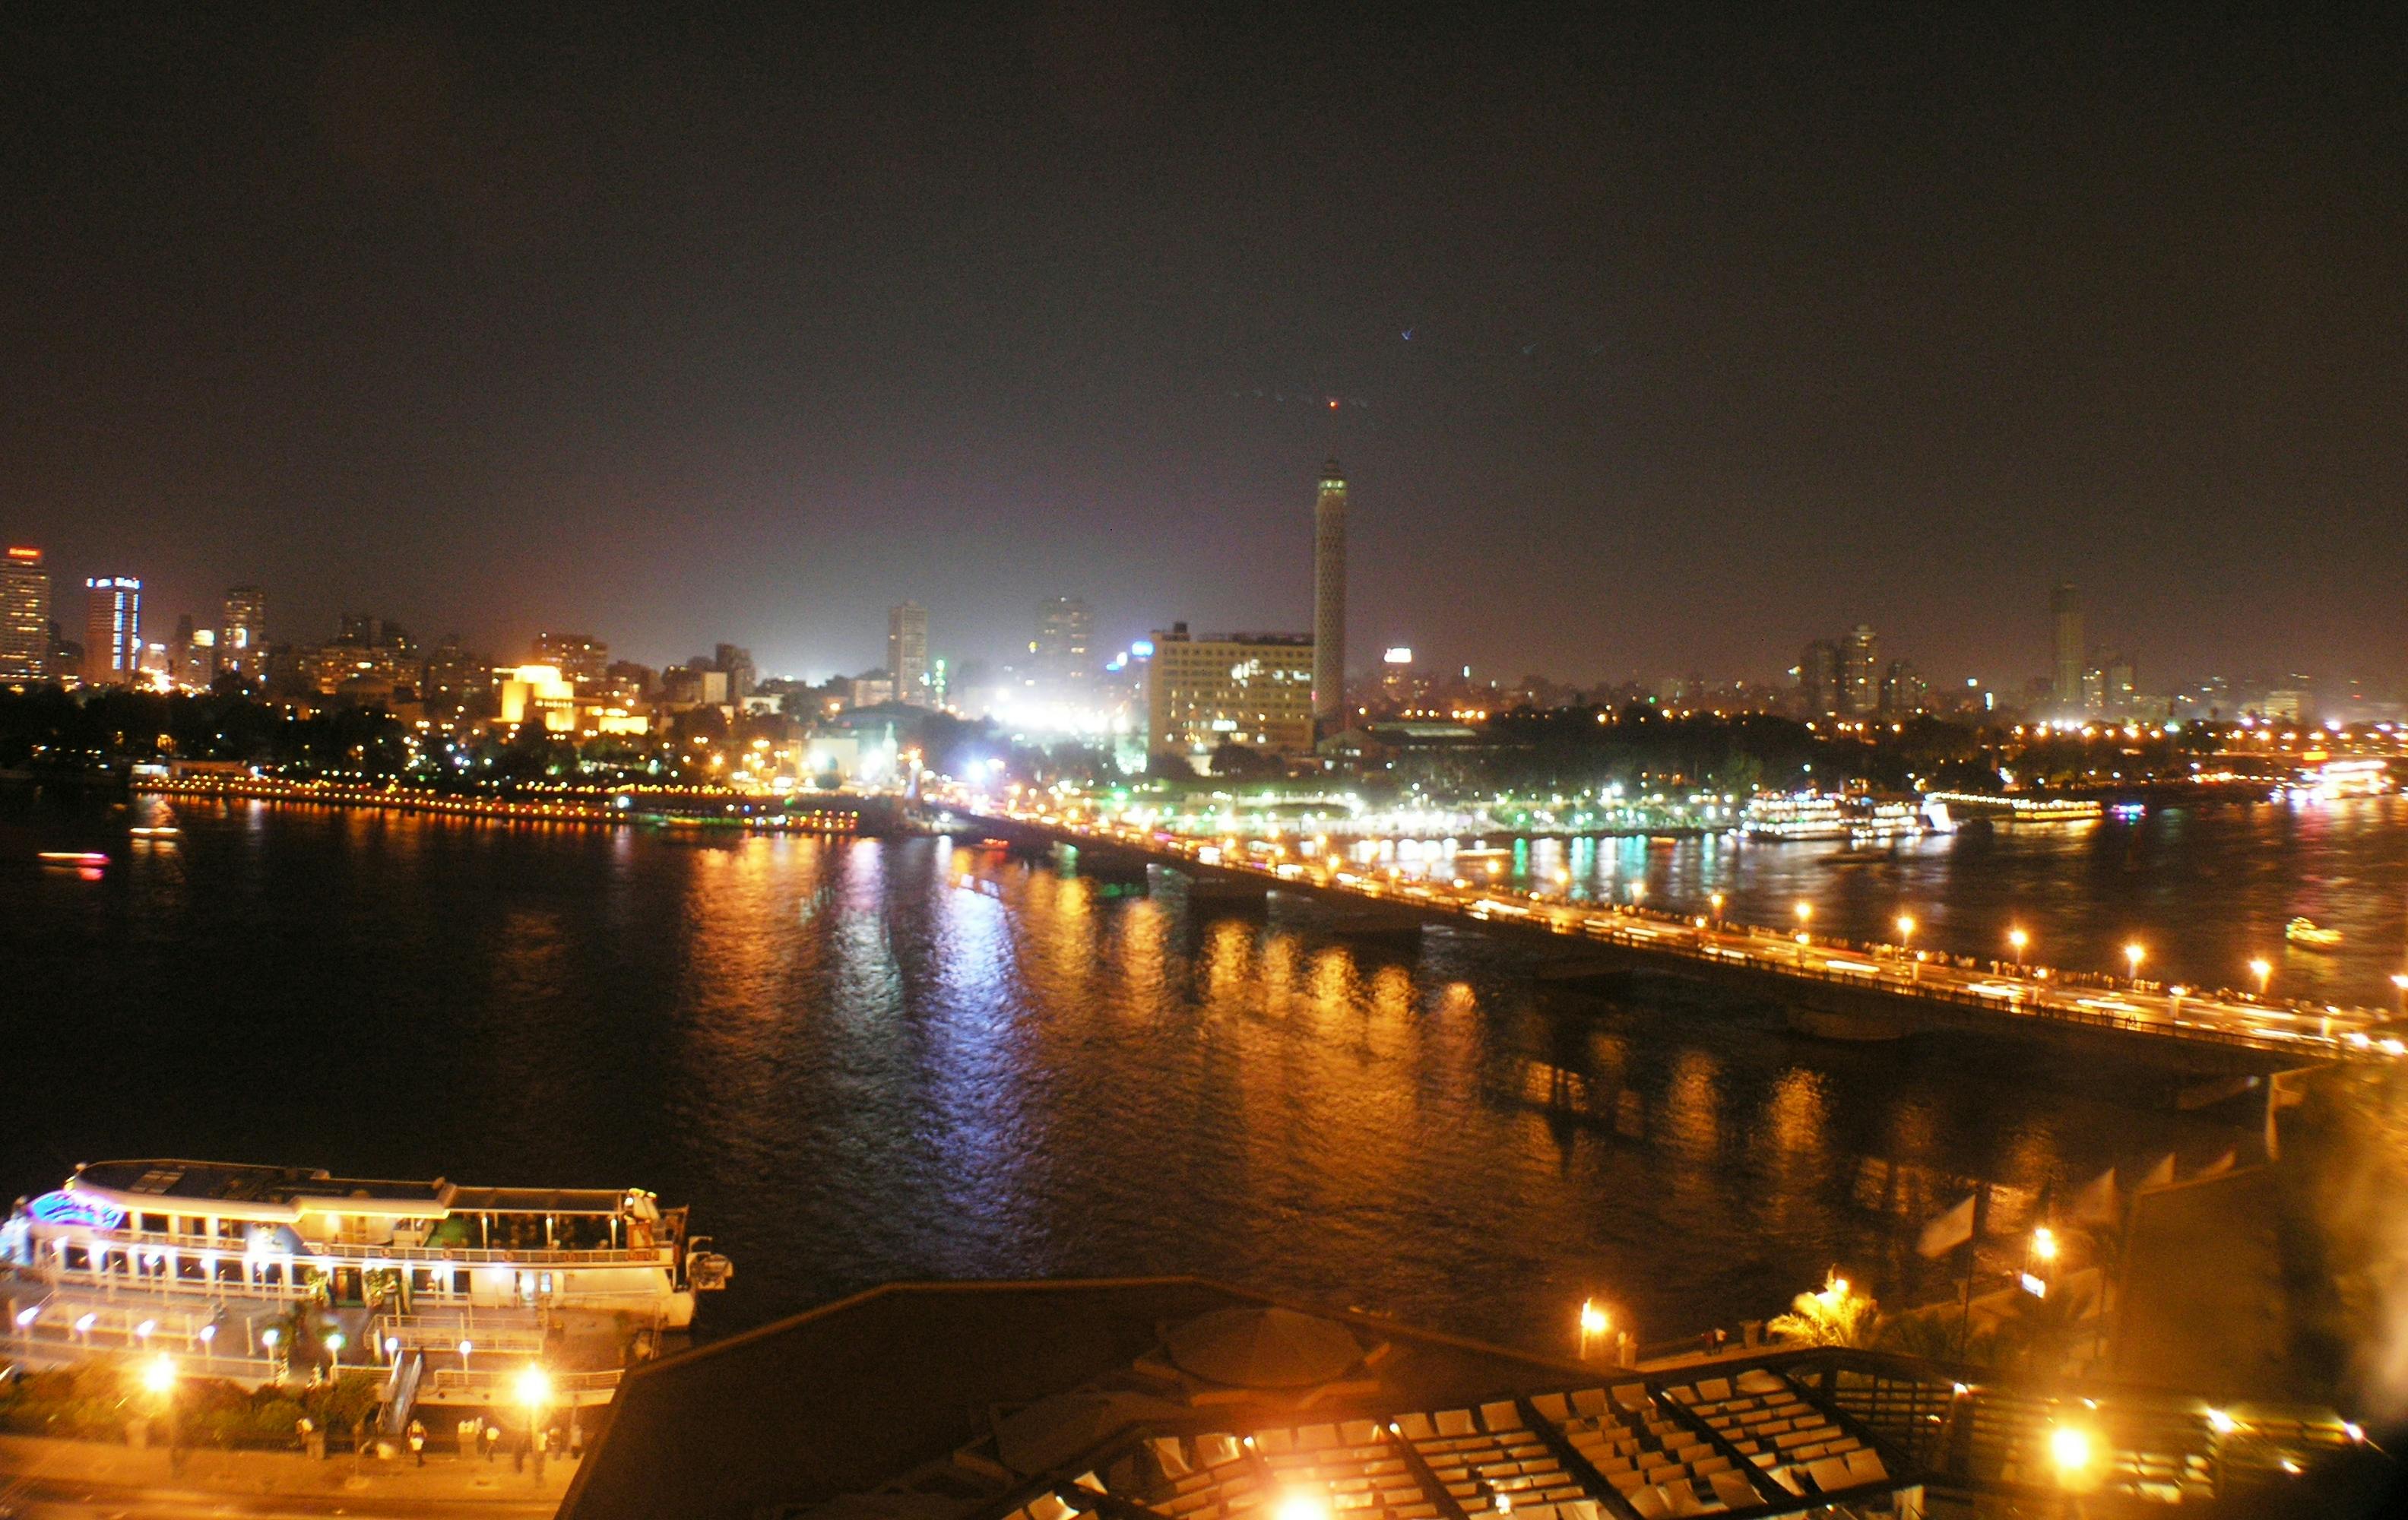 Nile River Dinner Cruise with Show and Entertainment in Cairo